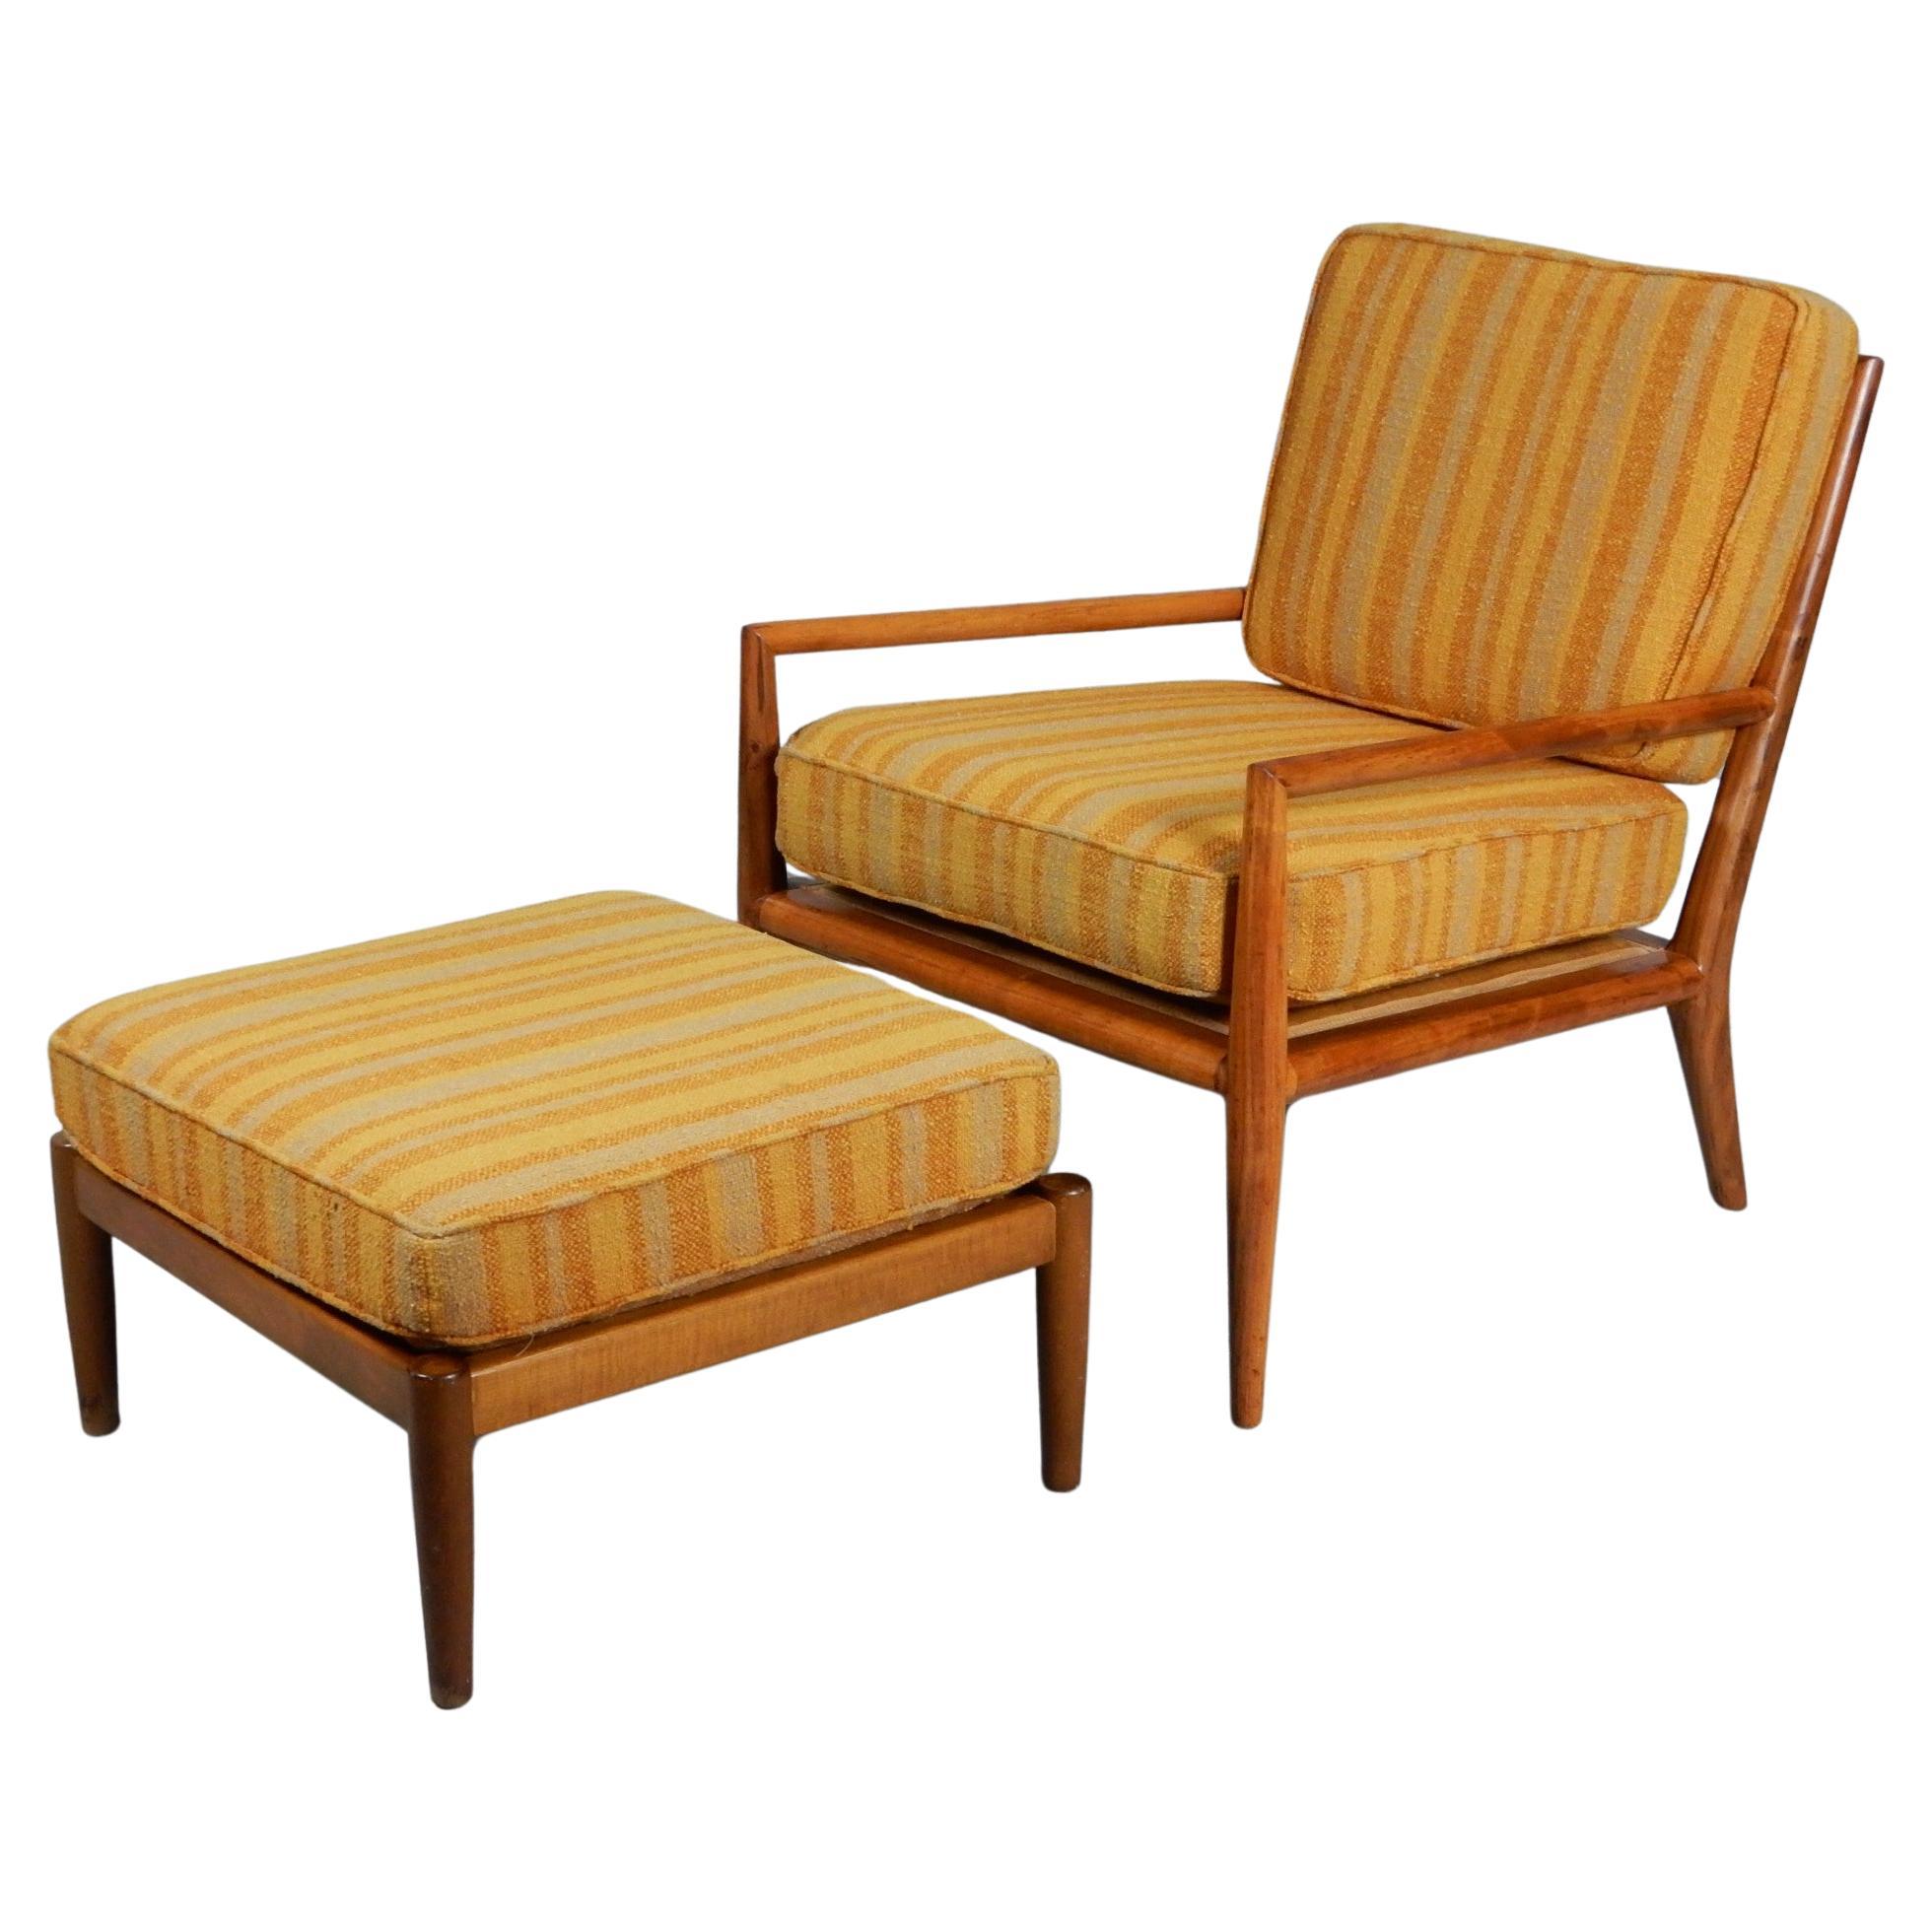 Elegant modern lounge chair designed by T.H. Robsjohn-Gibbings for Widdicomb, circa 1950s. Mated with a different manufactured but matching ottoman. Both are solid walnut wood frames with Jack Lenor Larson style striped weave upholstery. No repairs